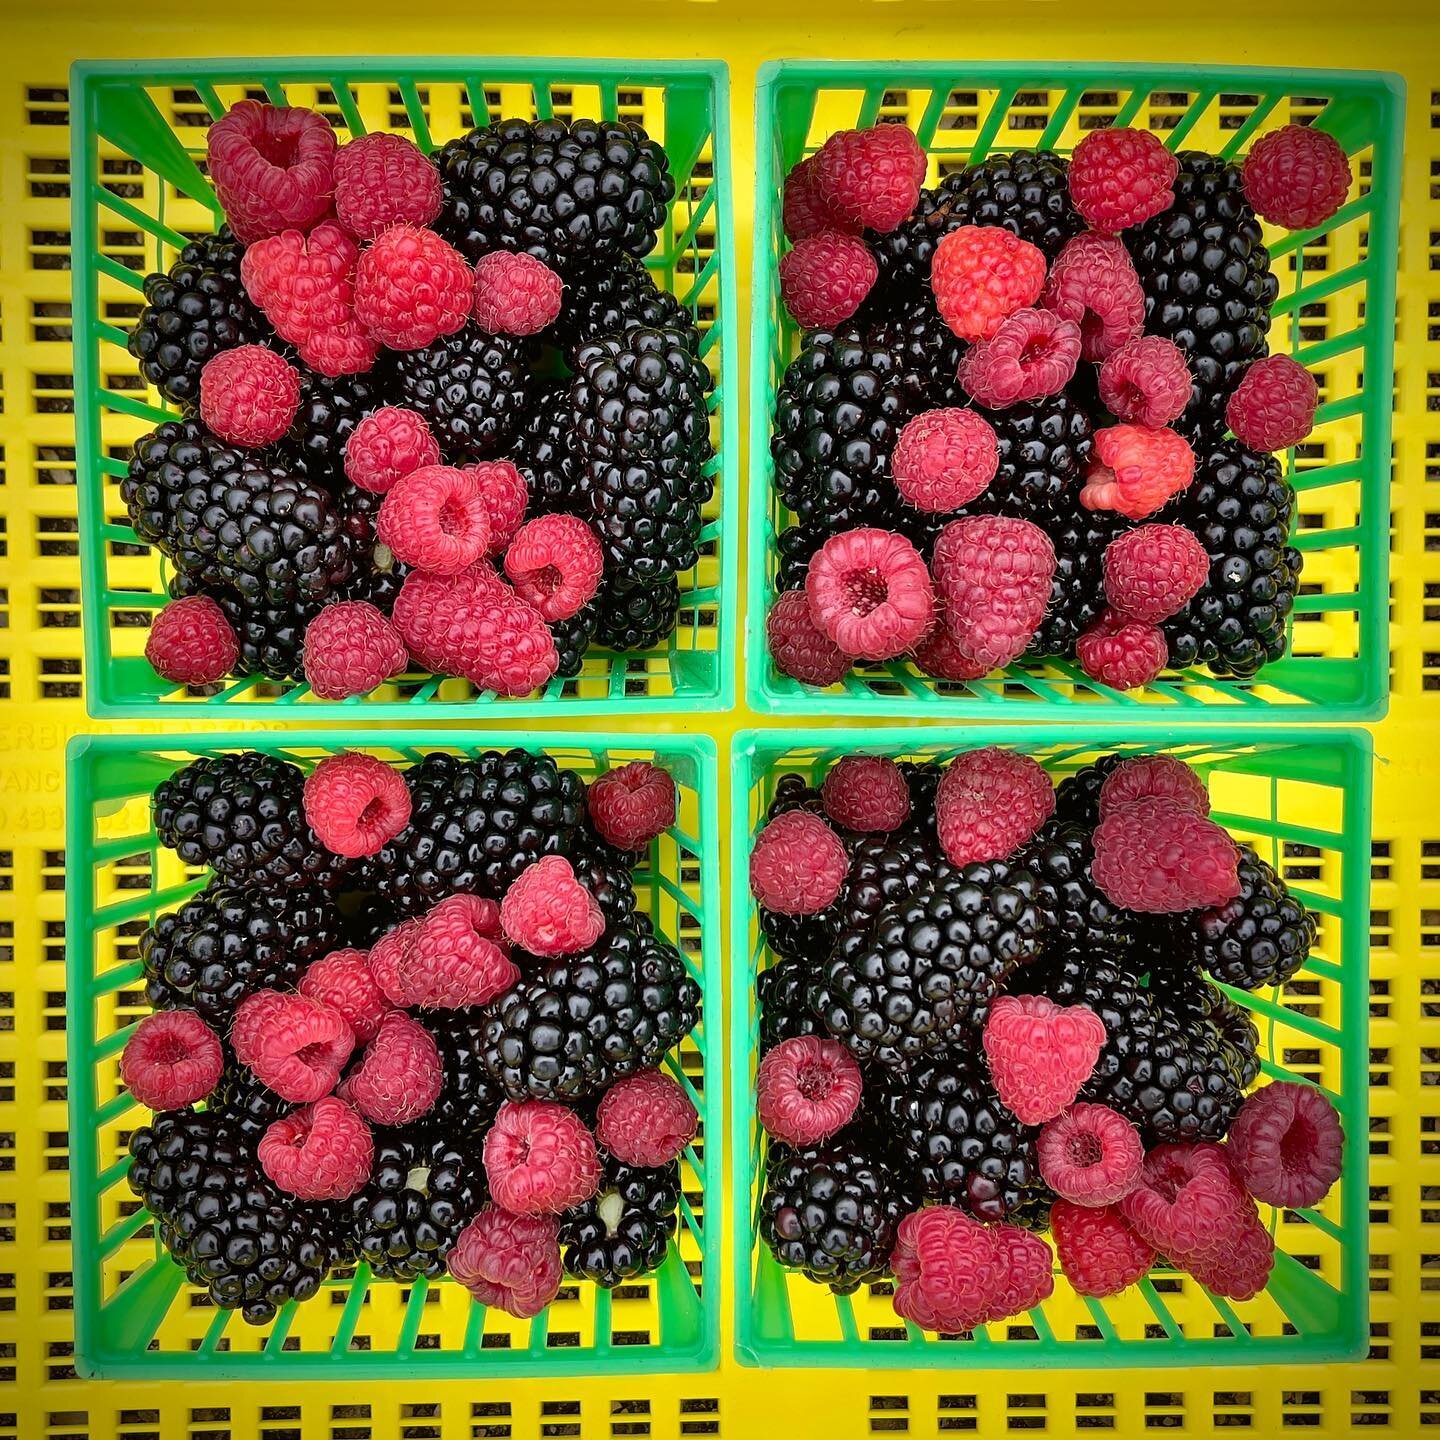 Berry time! We tried something new last year - adding blackberries &amp; raspberries to our pollinator garden. 

Berry crops provide a great floral resource for pollinators &amp; cane berries also provide nest sites for cavity nesting bees. It&rsquo;